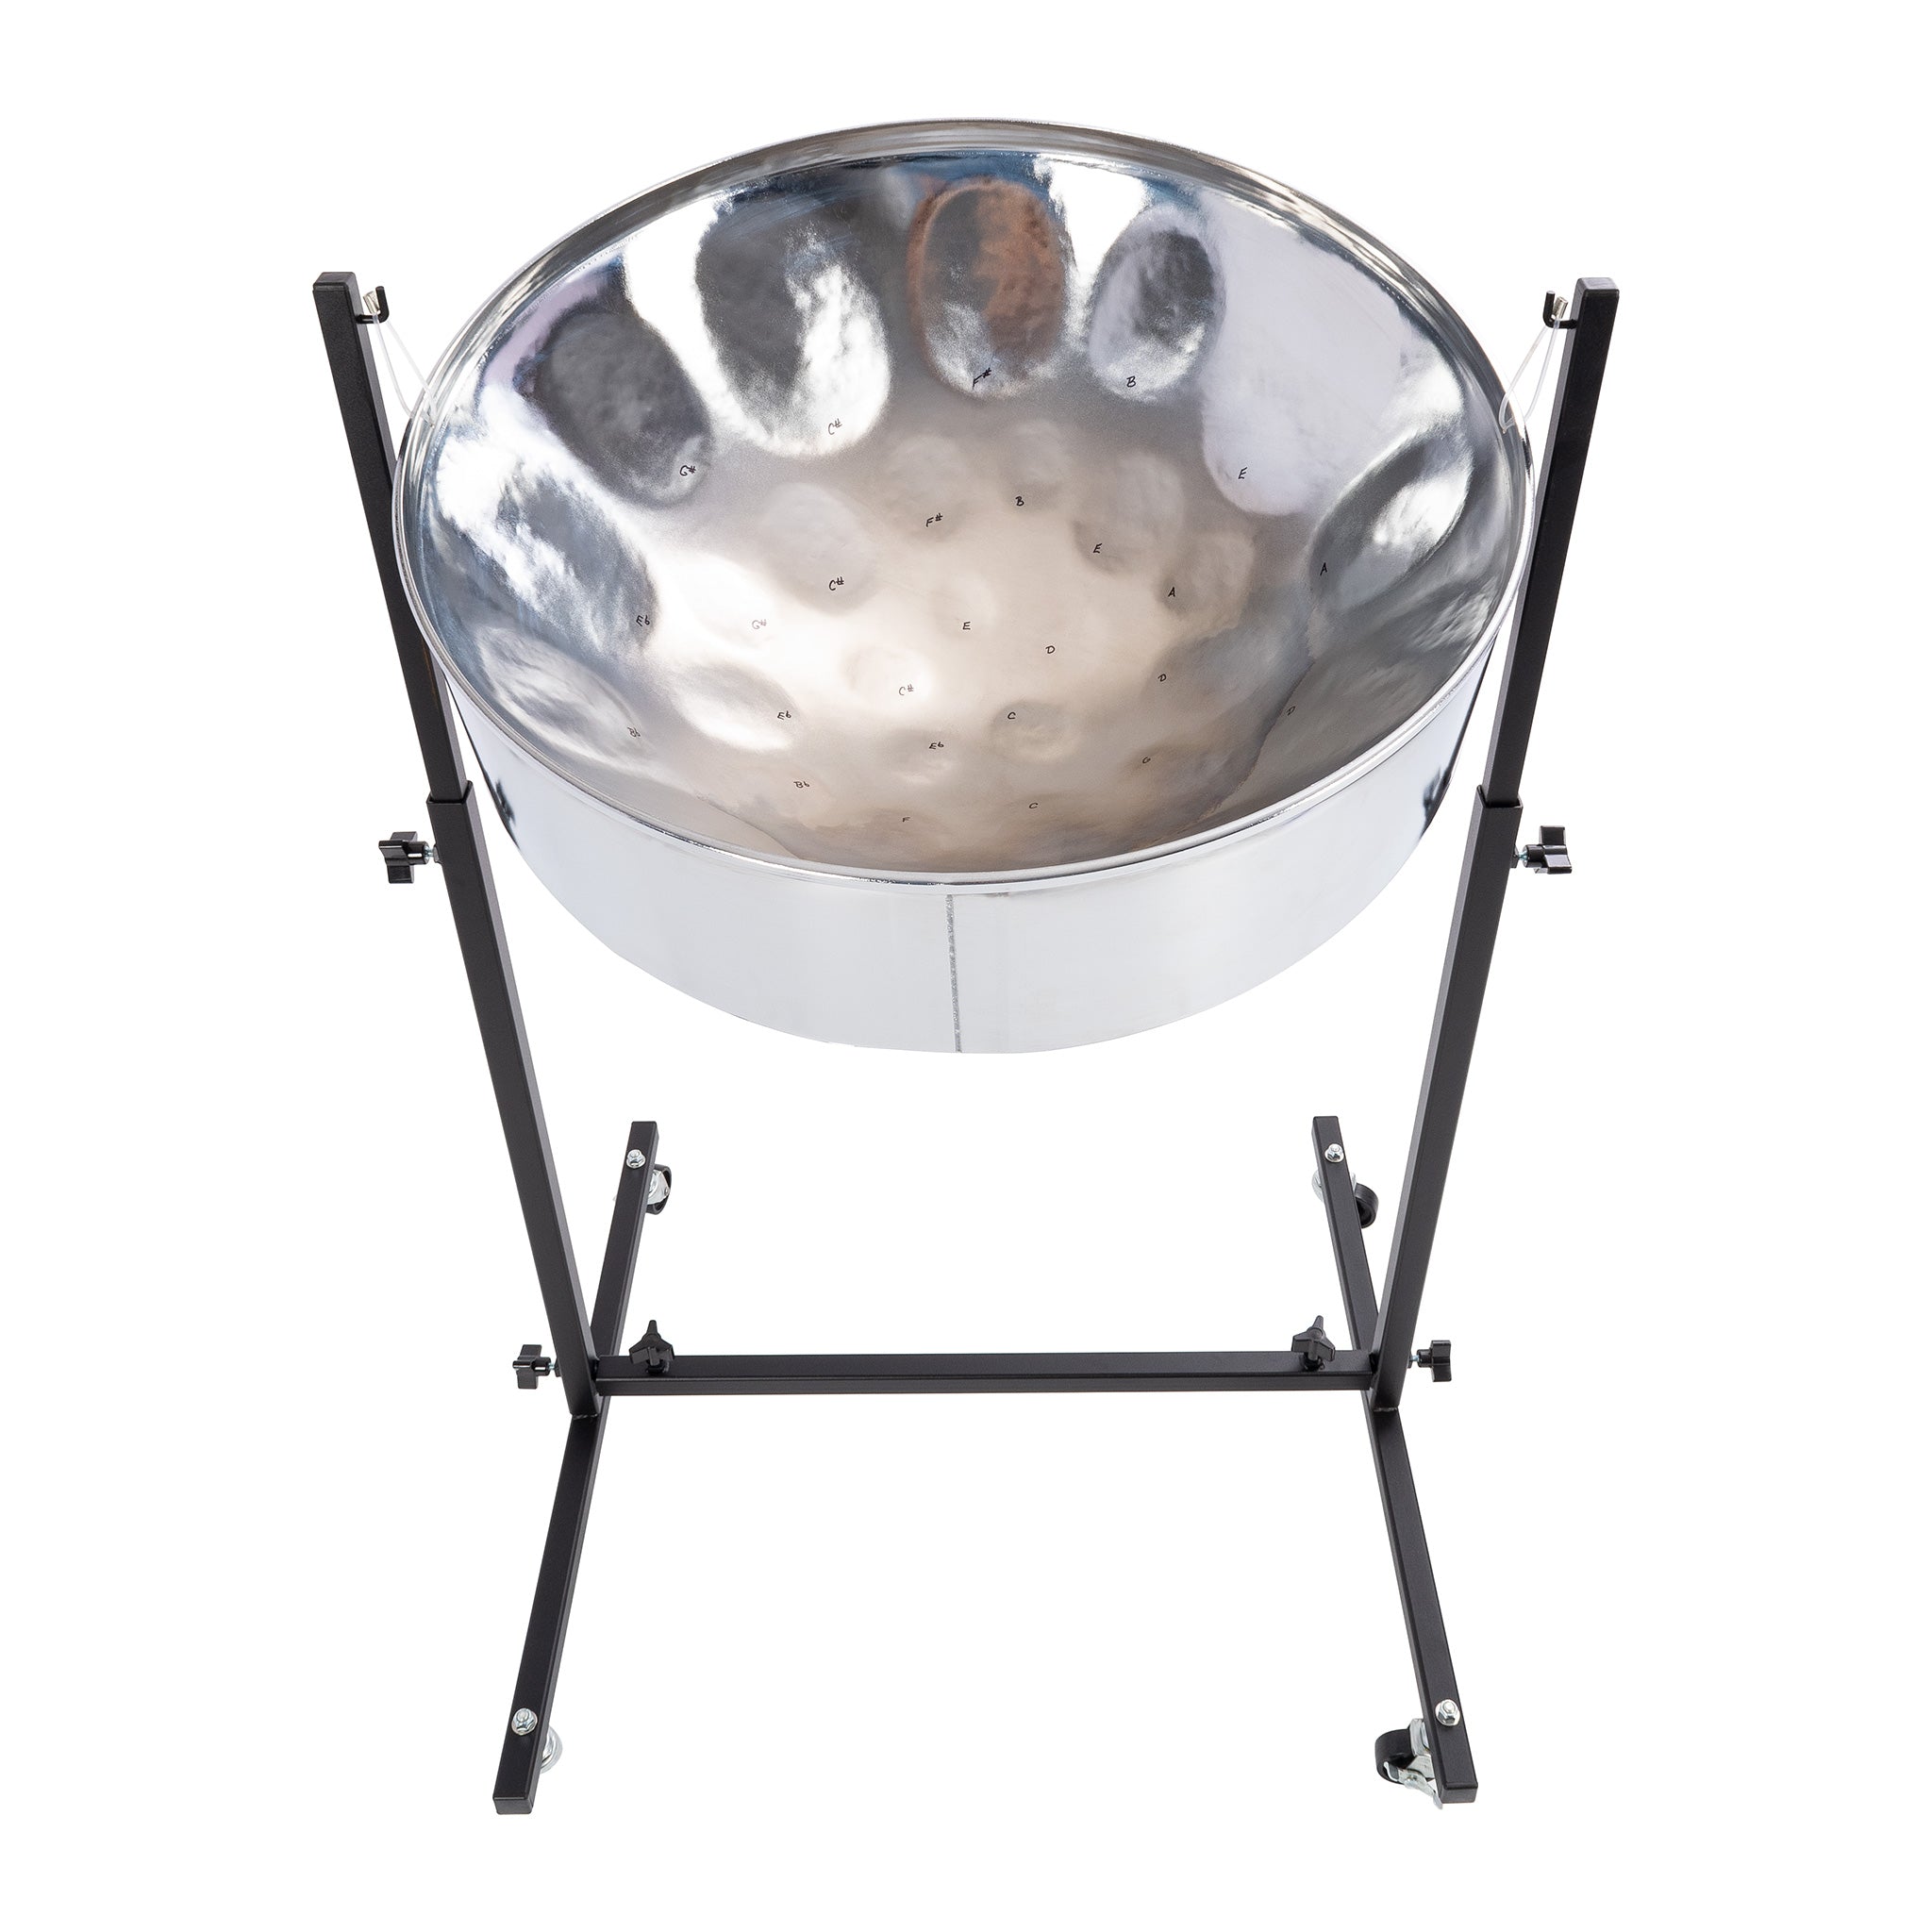 Percussion Plus Hammer Series lead steel pan :: Percussion Plus